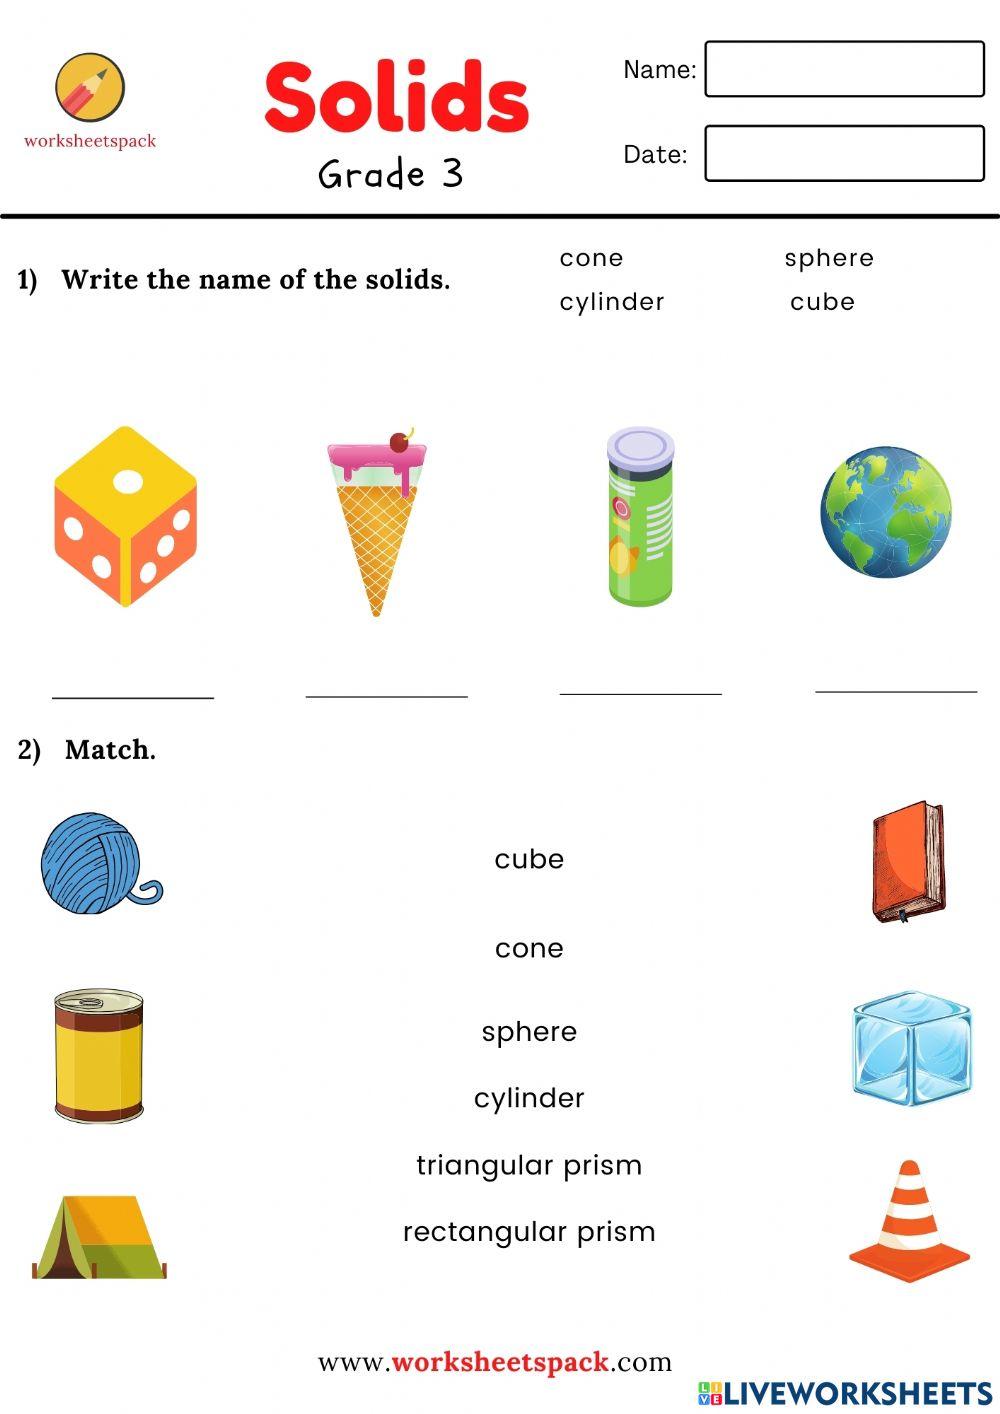 Solids match and write the name of the solids worksheet